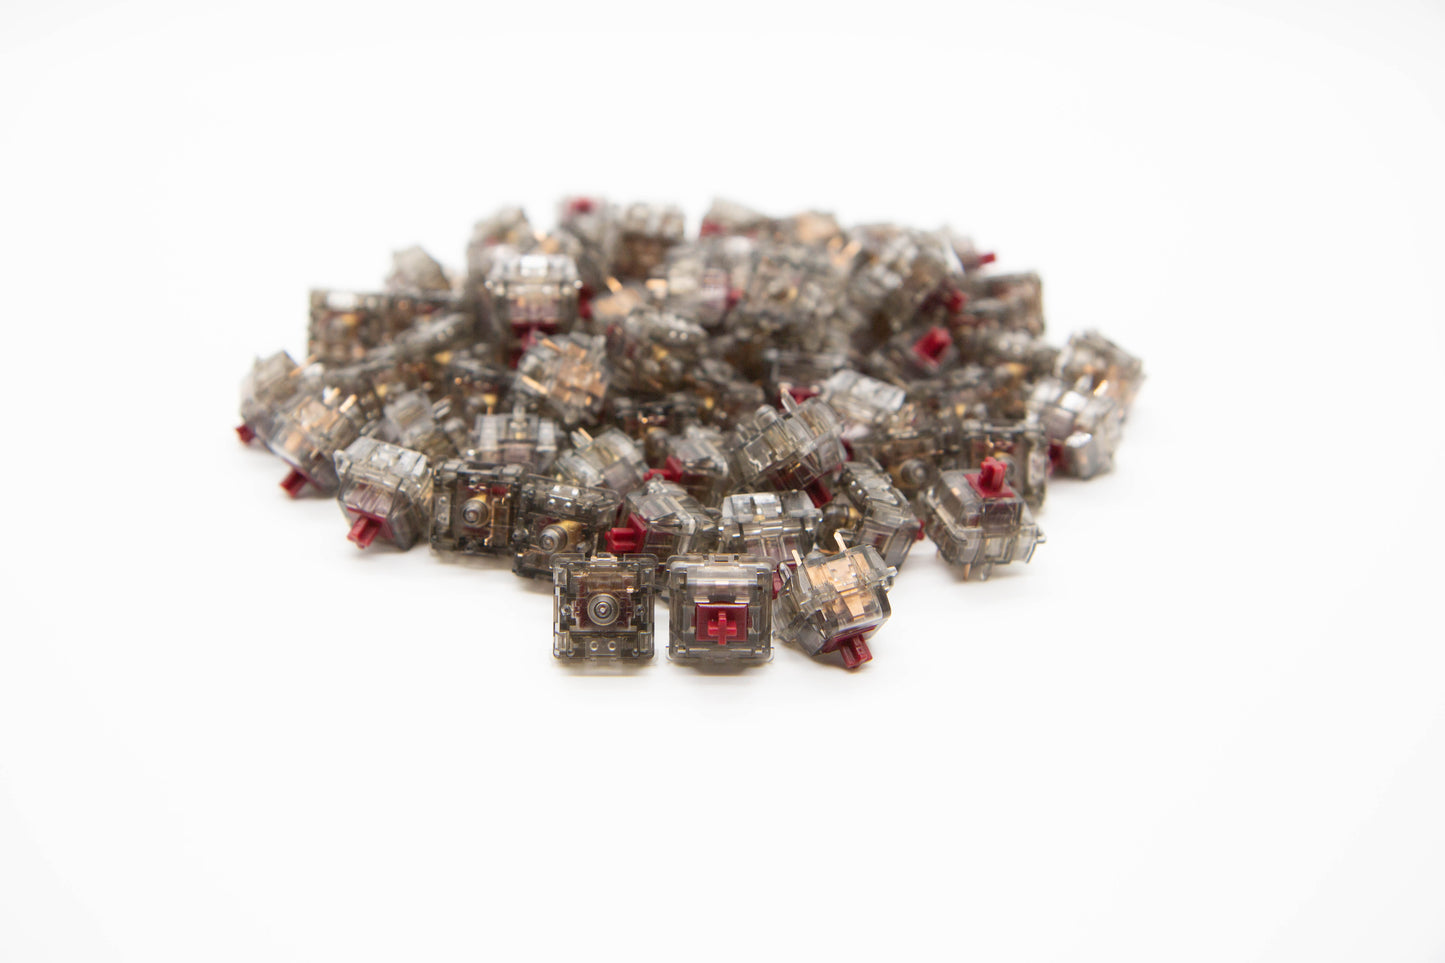 Close-up shot of a pile of Light Tactile mechanical keyboard switches featuring gray transparent housing and dark red stems